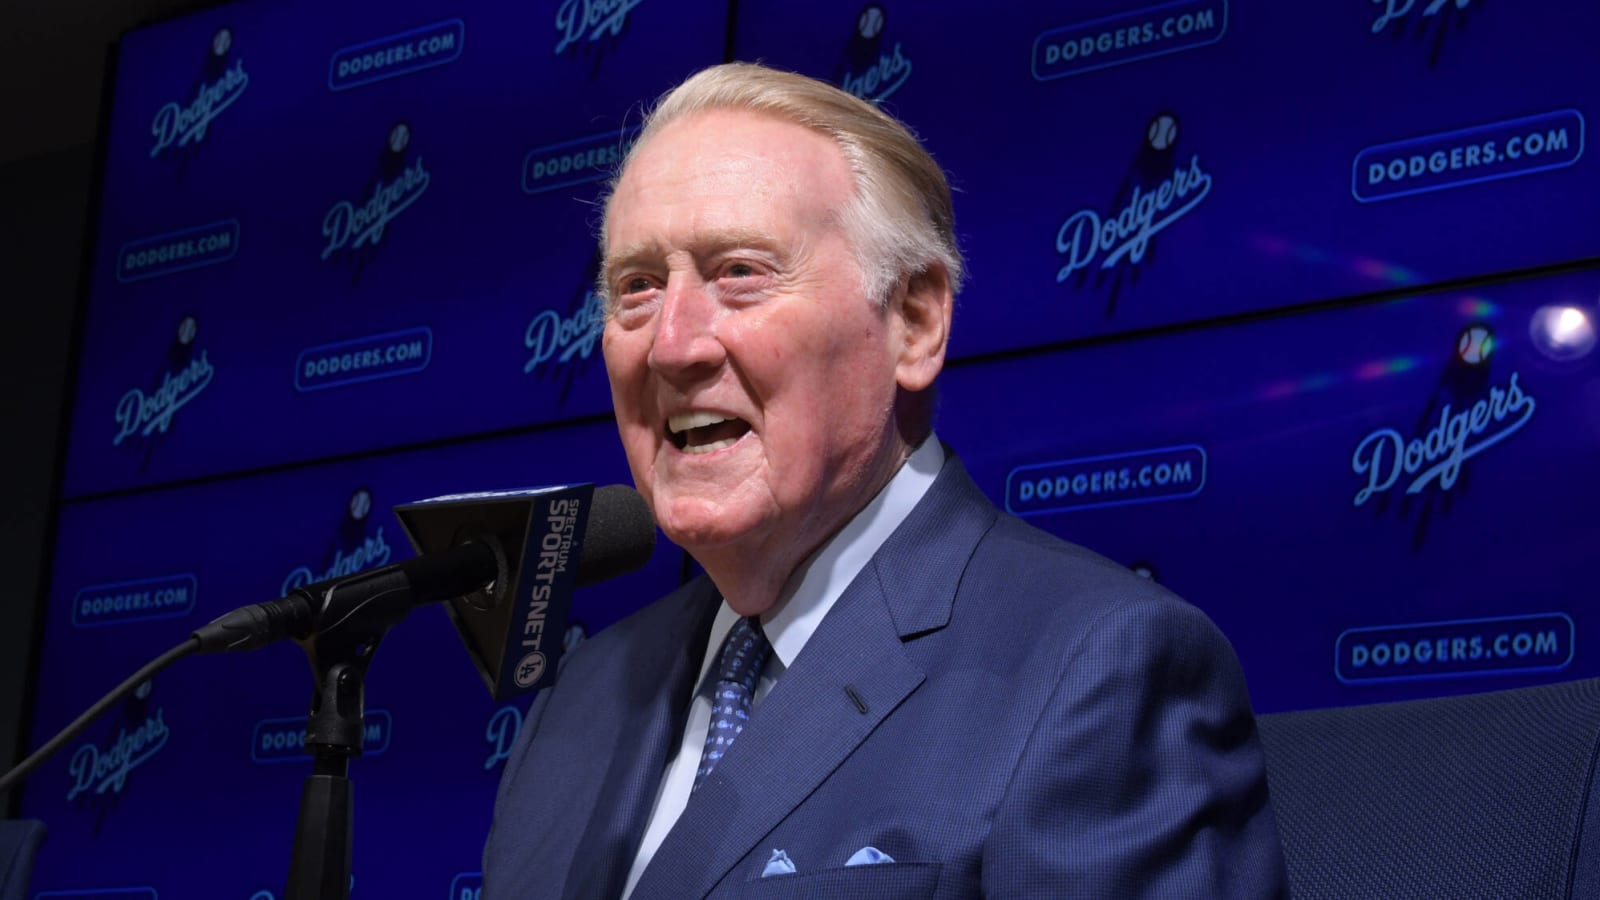 Vin Scully shared story of how he fell in love with baseball